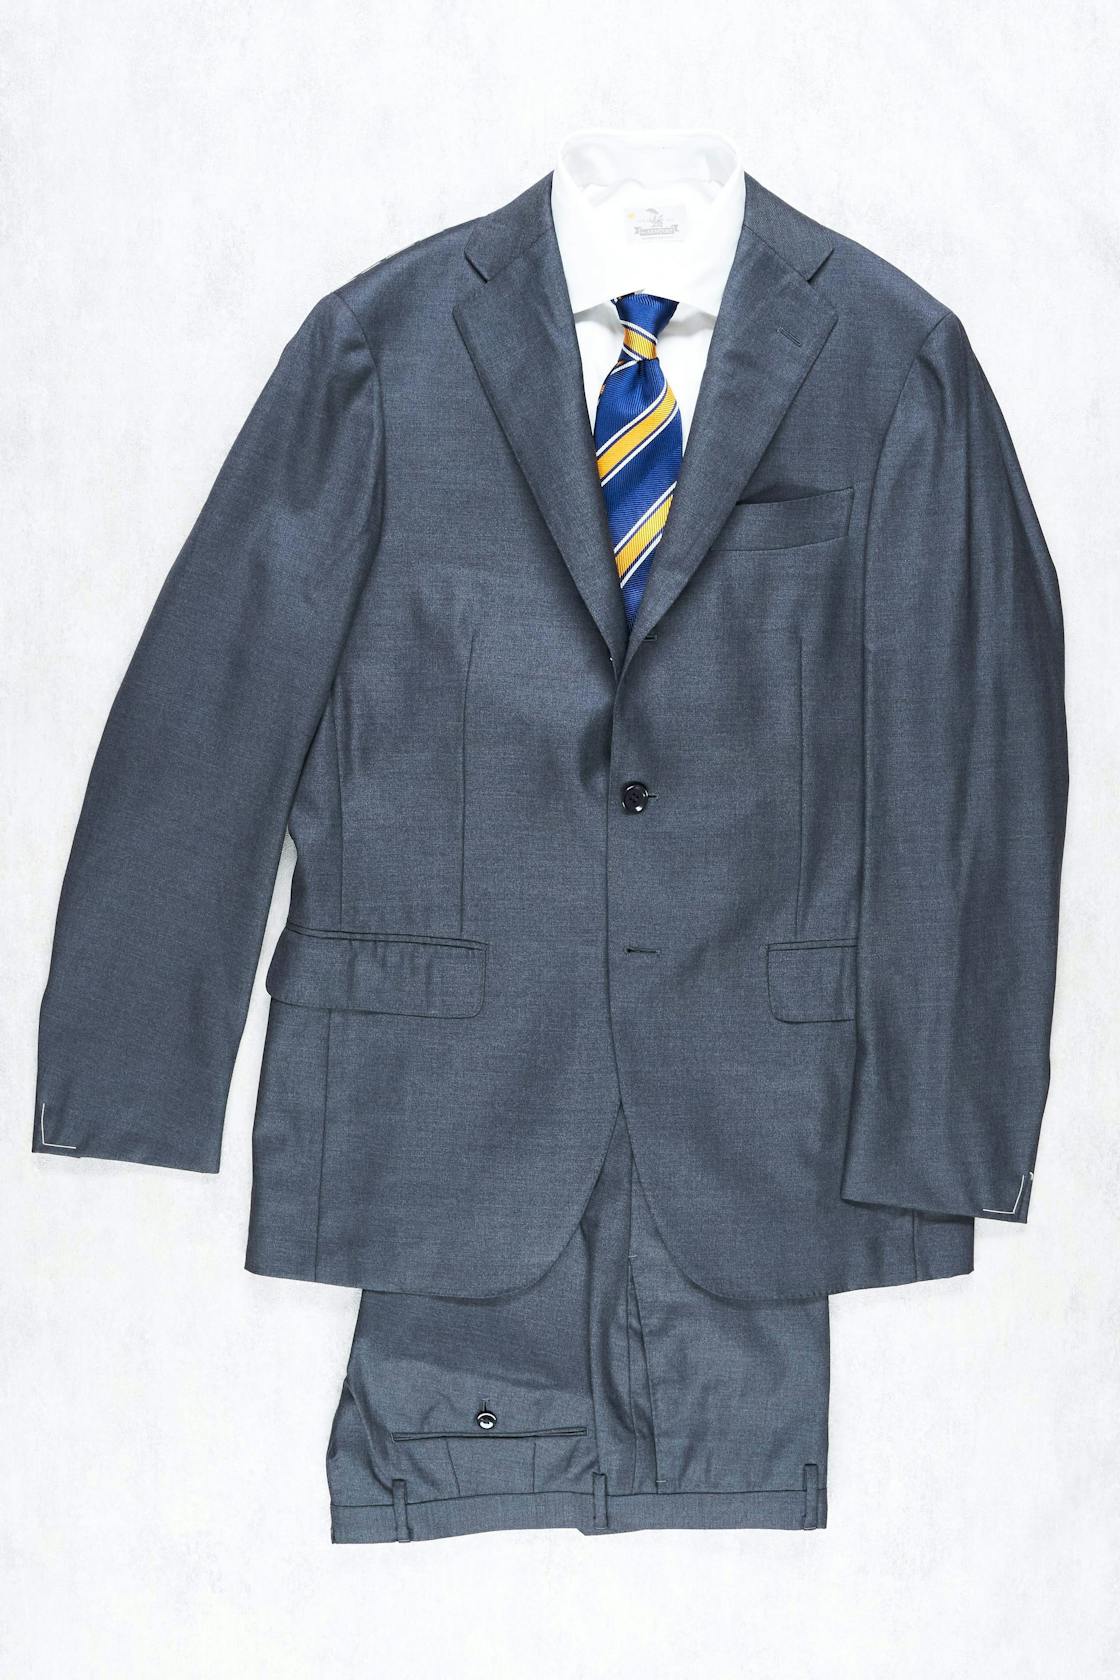 Ring Jacket 184 Grey Wool Twill Suit